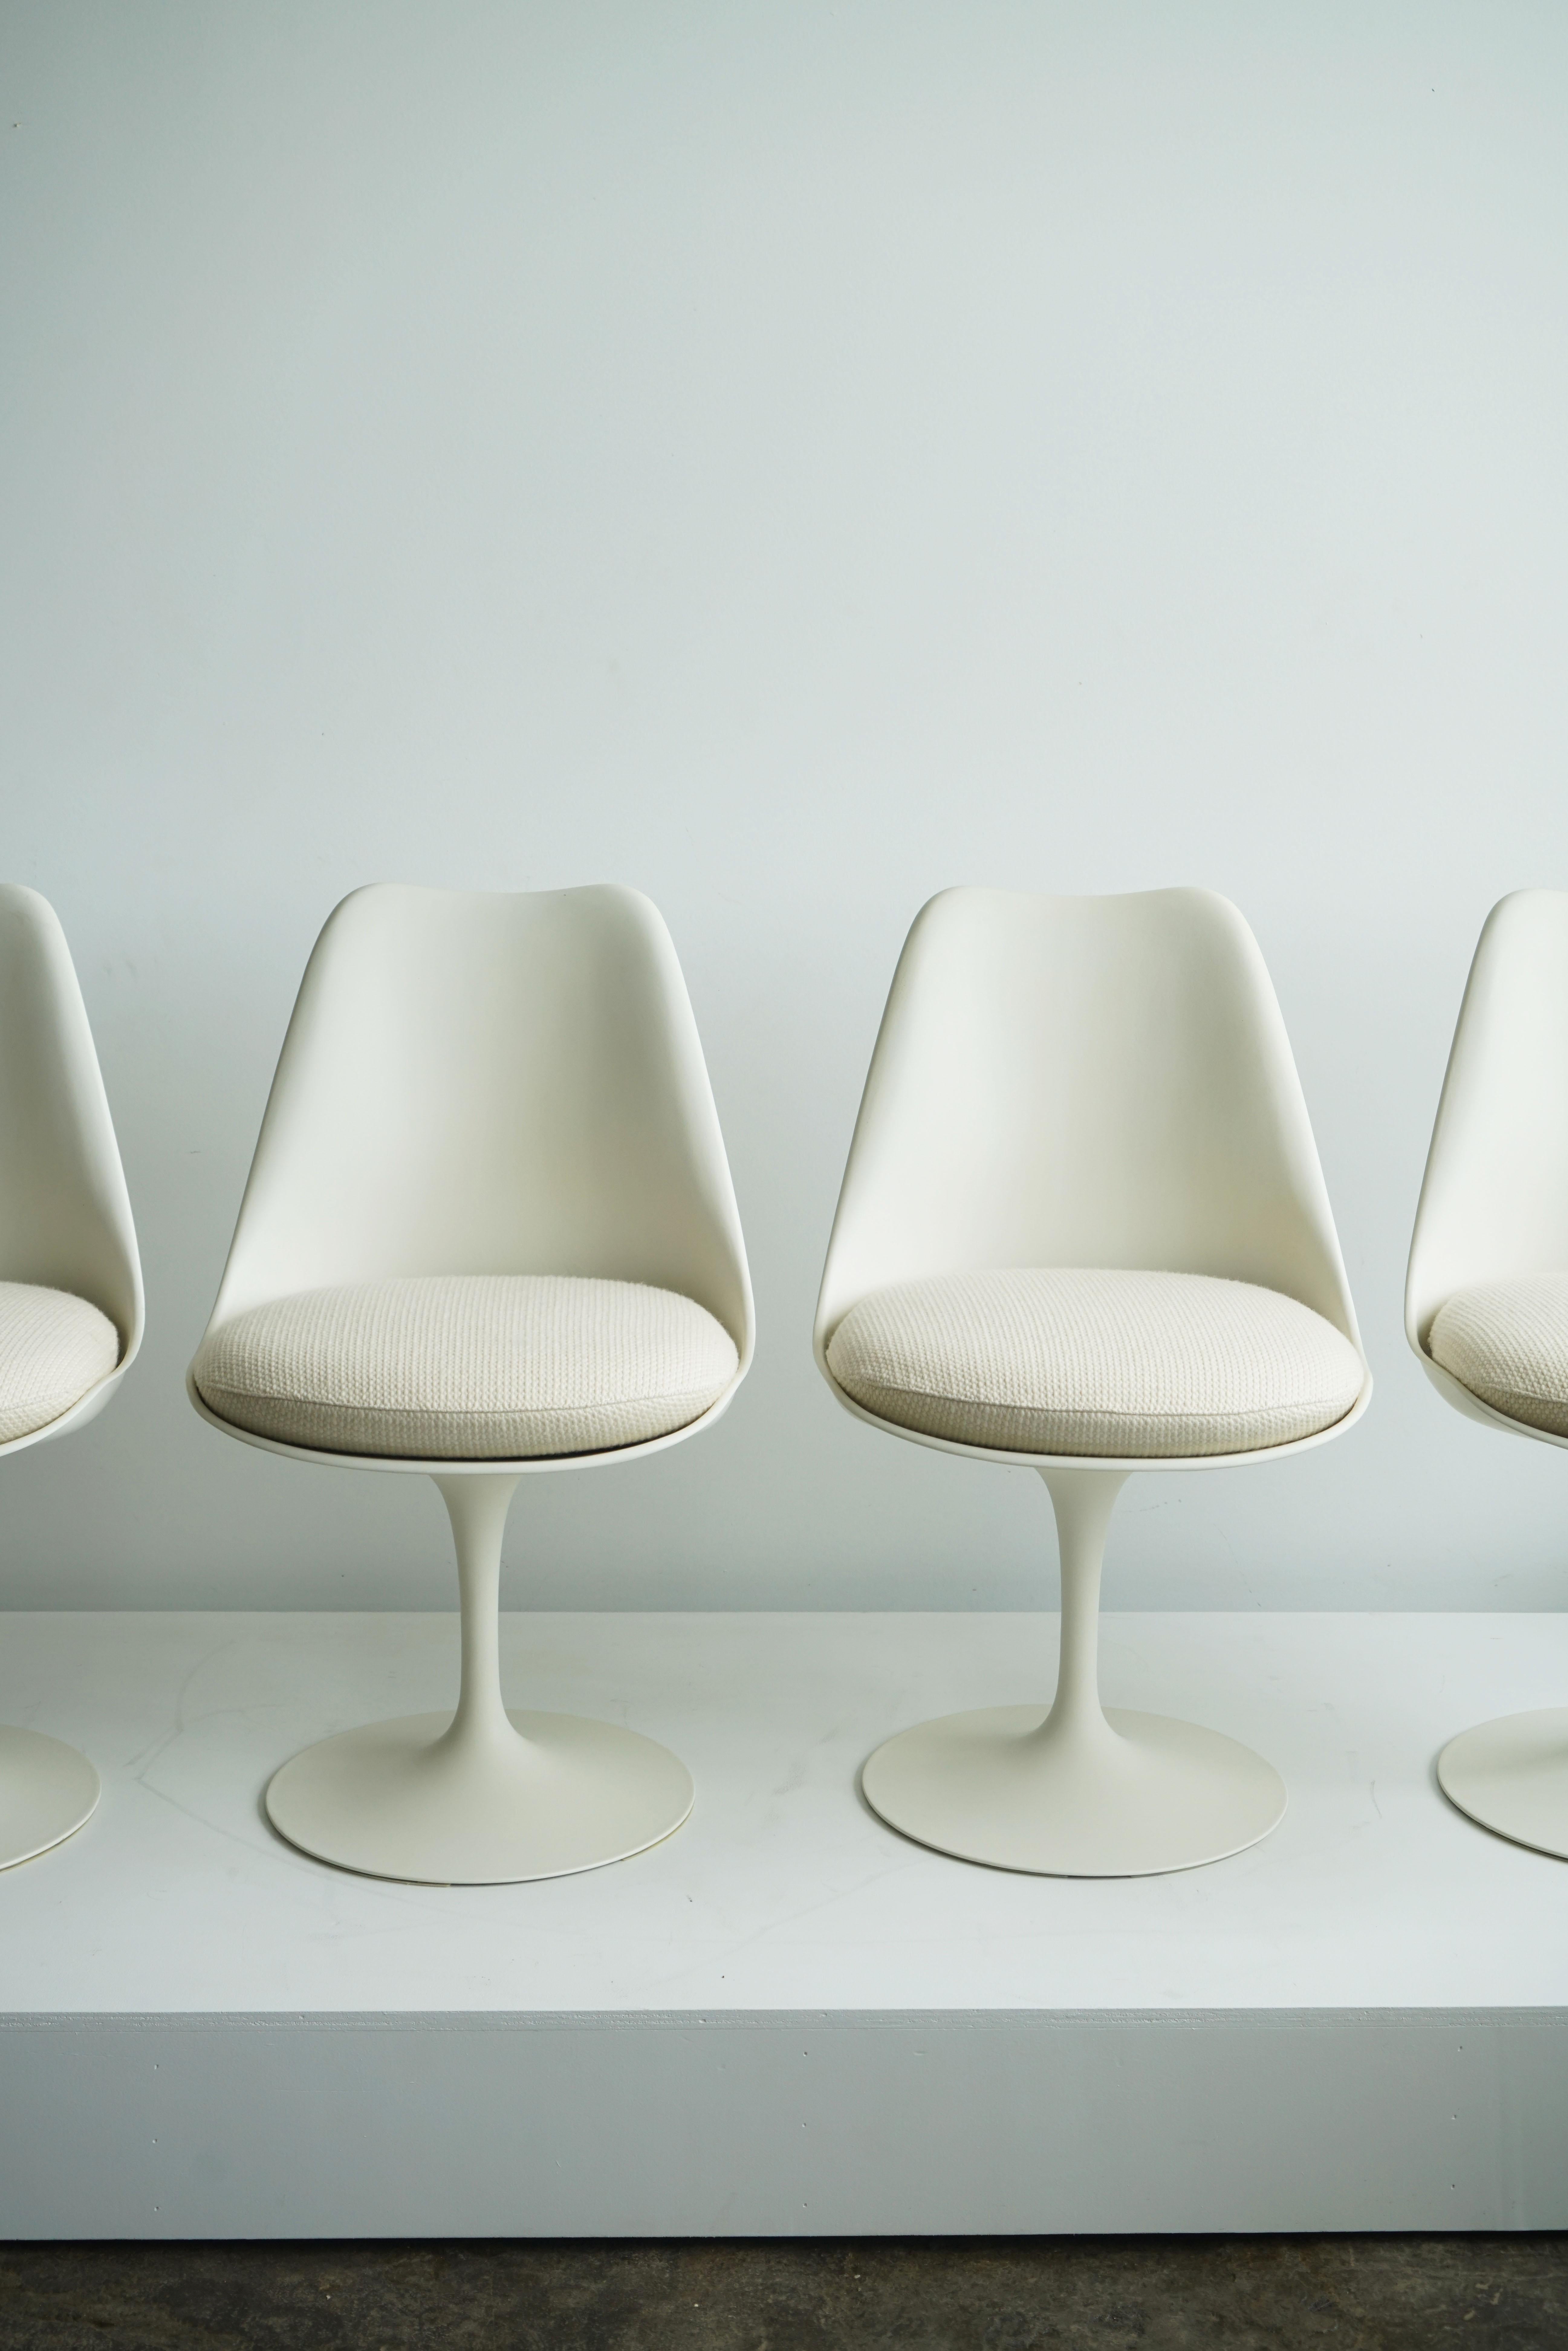 1960's Eero Saarinen Tulip dining chairs for Knoll, set of 4 upholstered For Sale 9